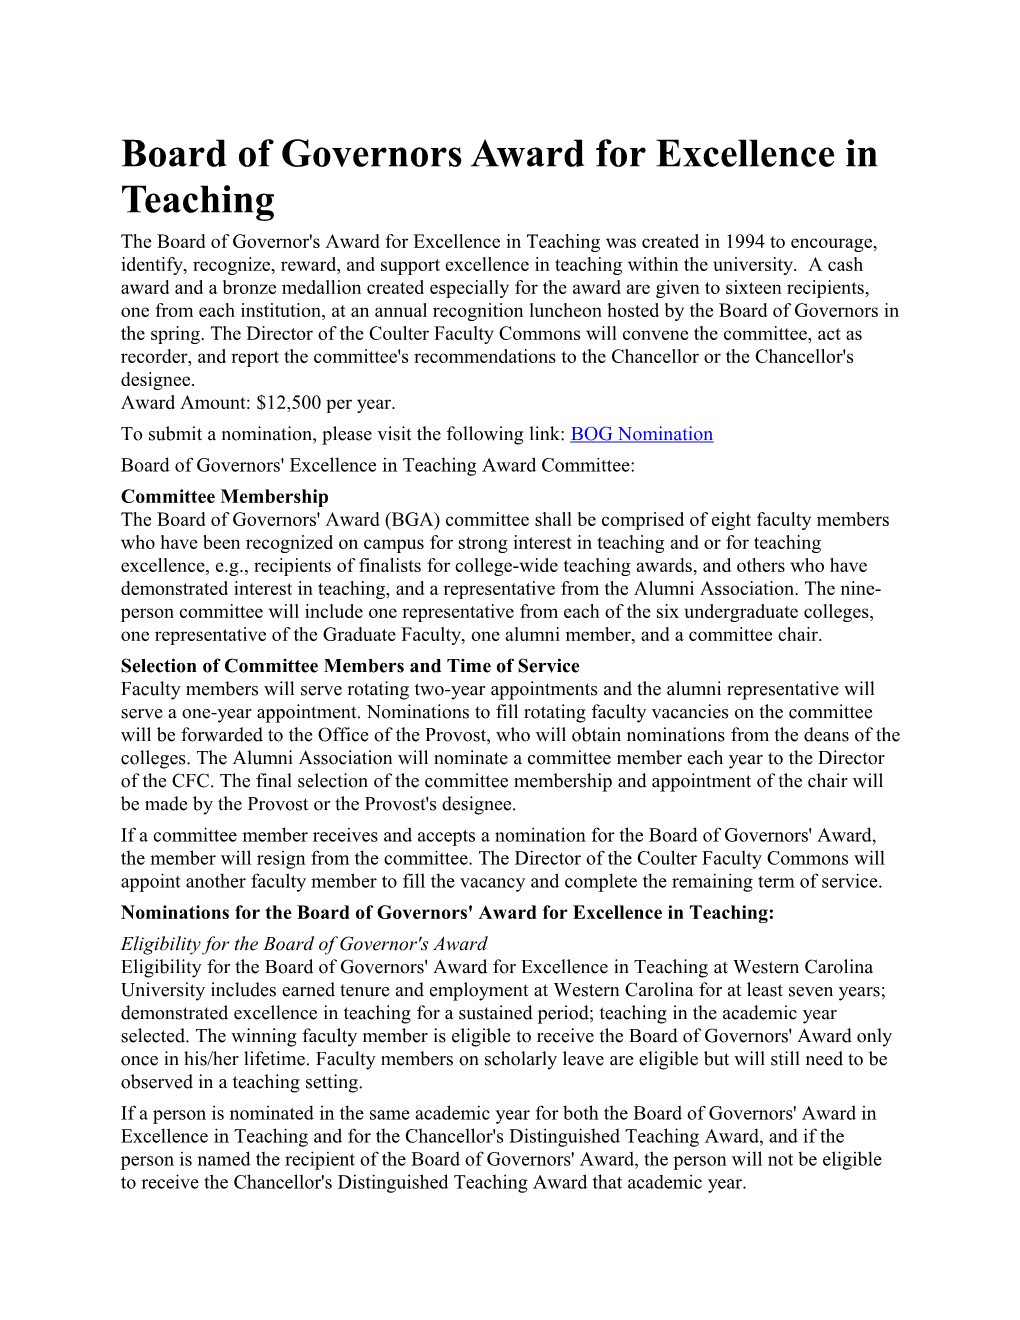 Board of Governors Award for Excellence in Teaching